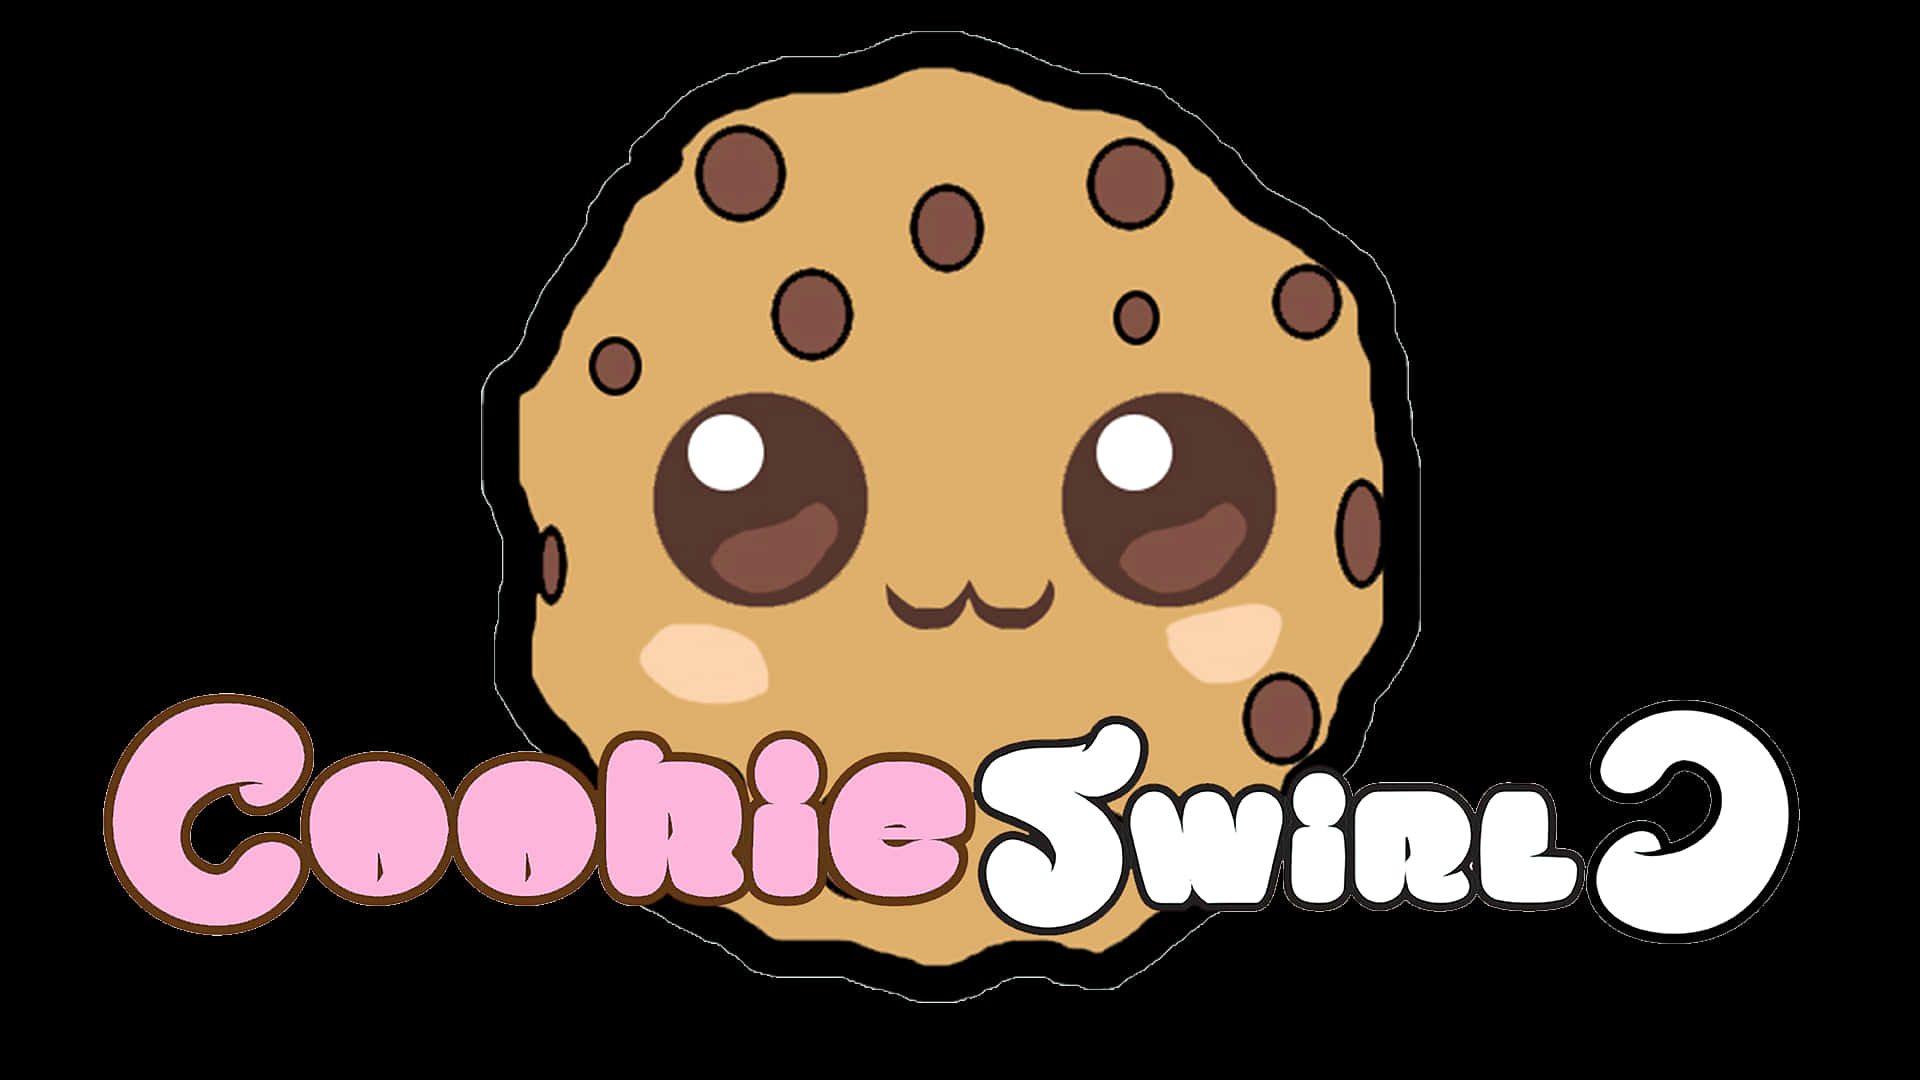 Get ready to have fun with Cookie Swirl C! Wallpaper